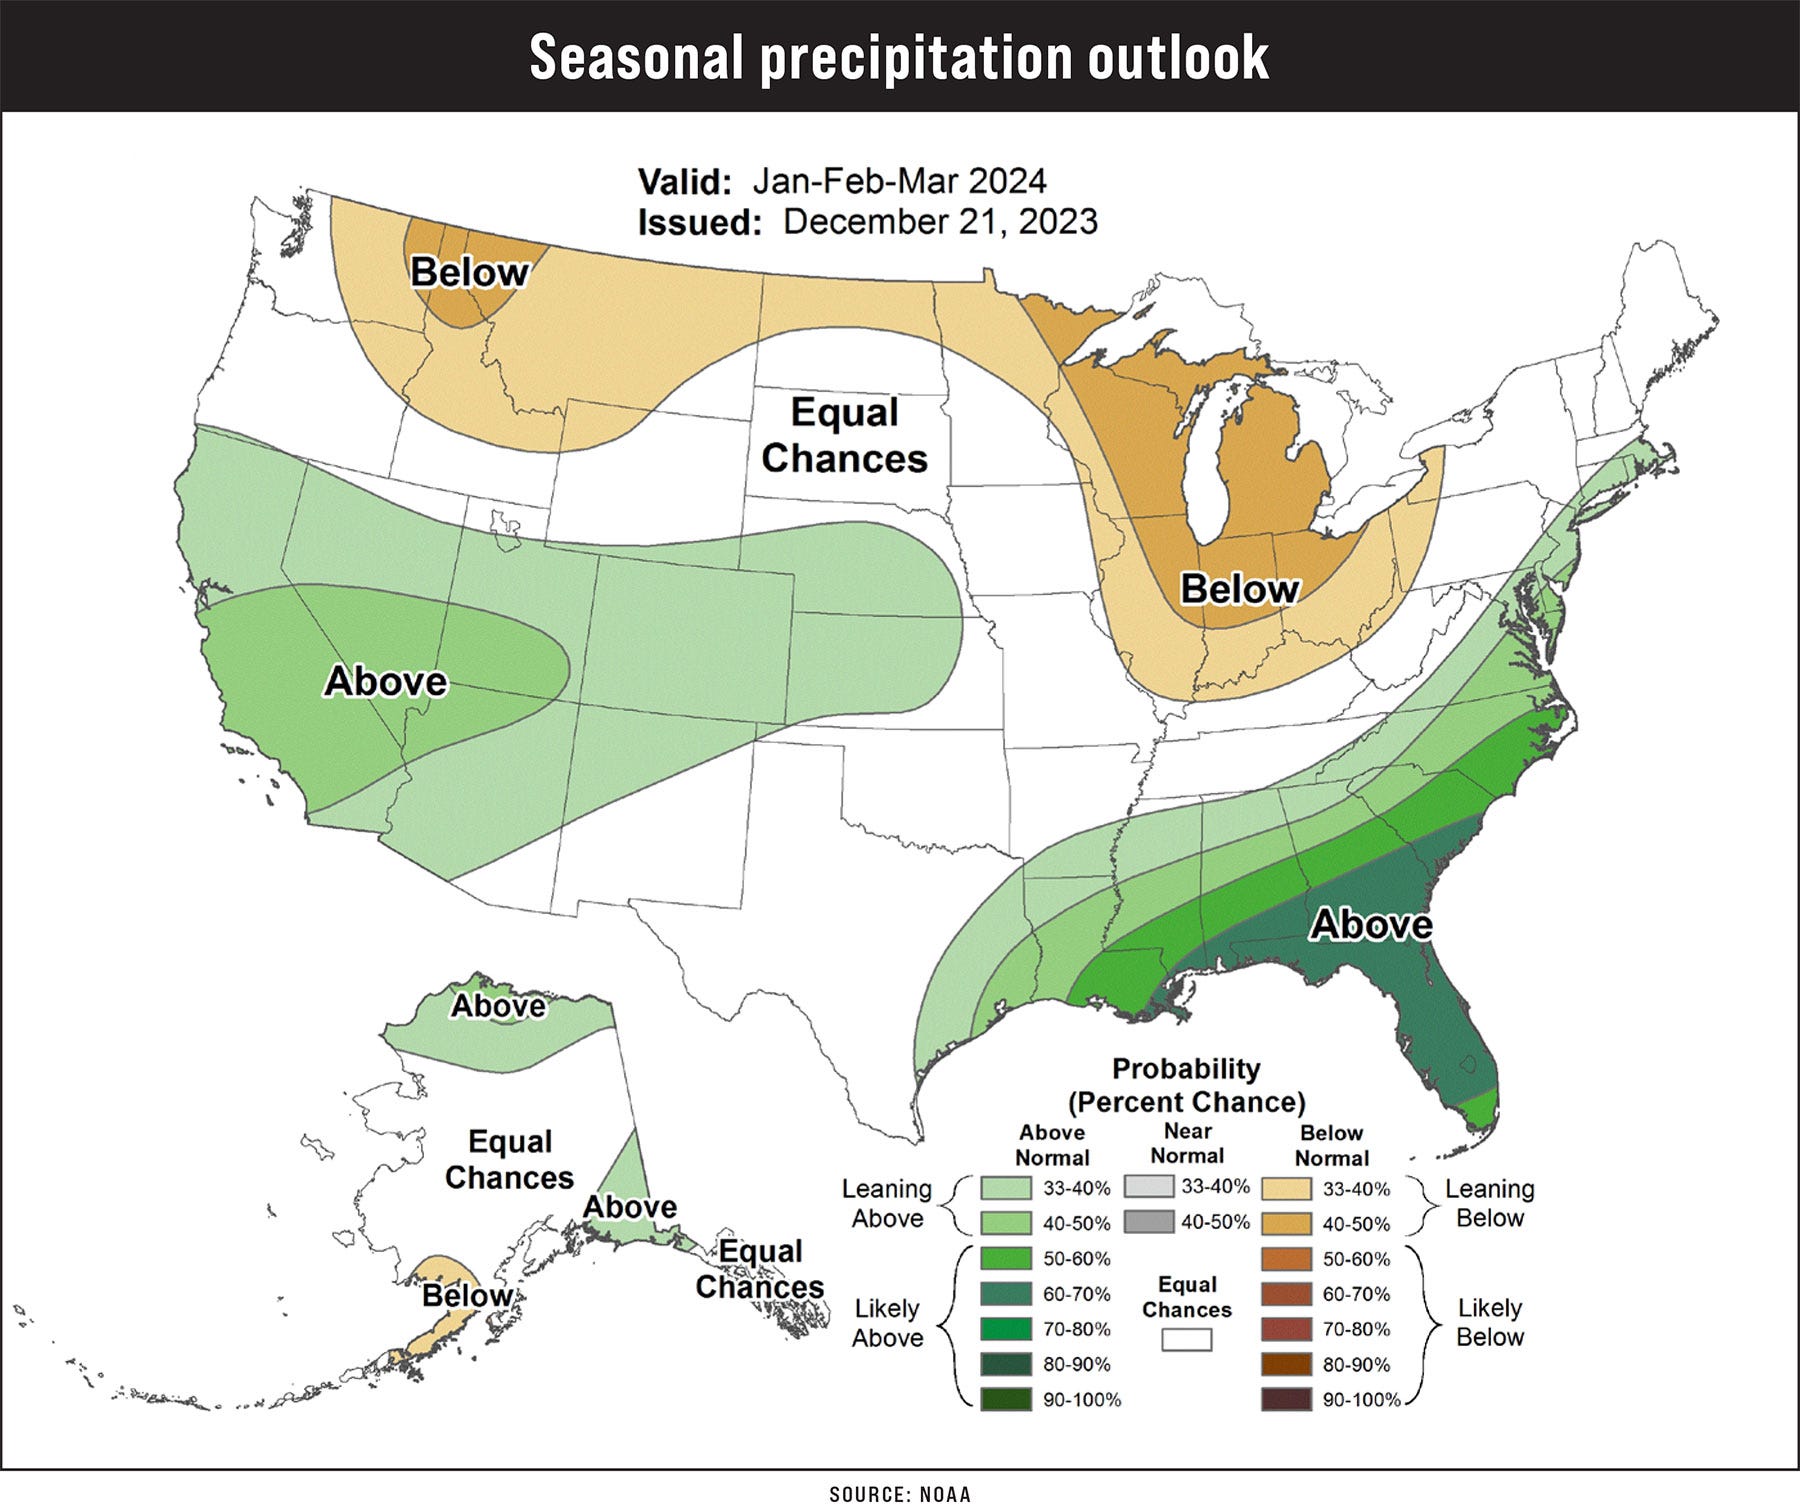 A colored map illustrating seasonal precipitation outlook in the United States